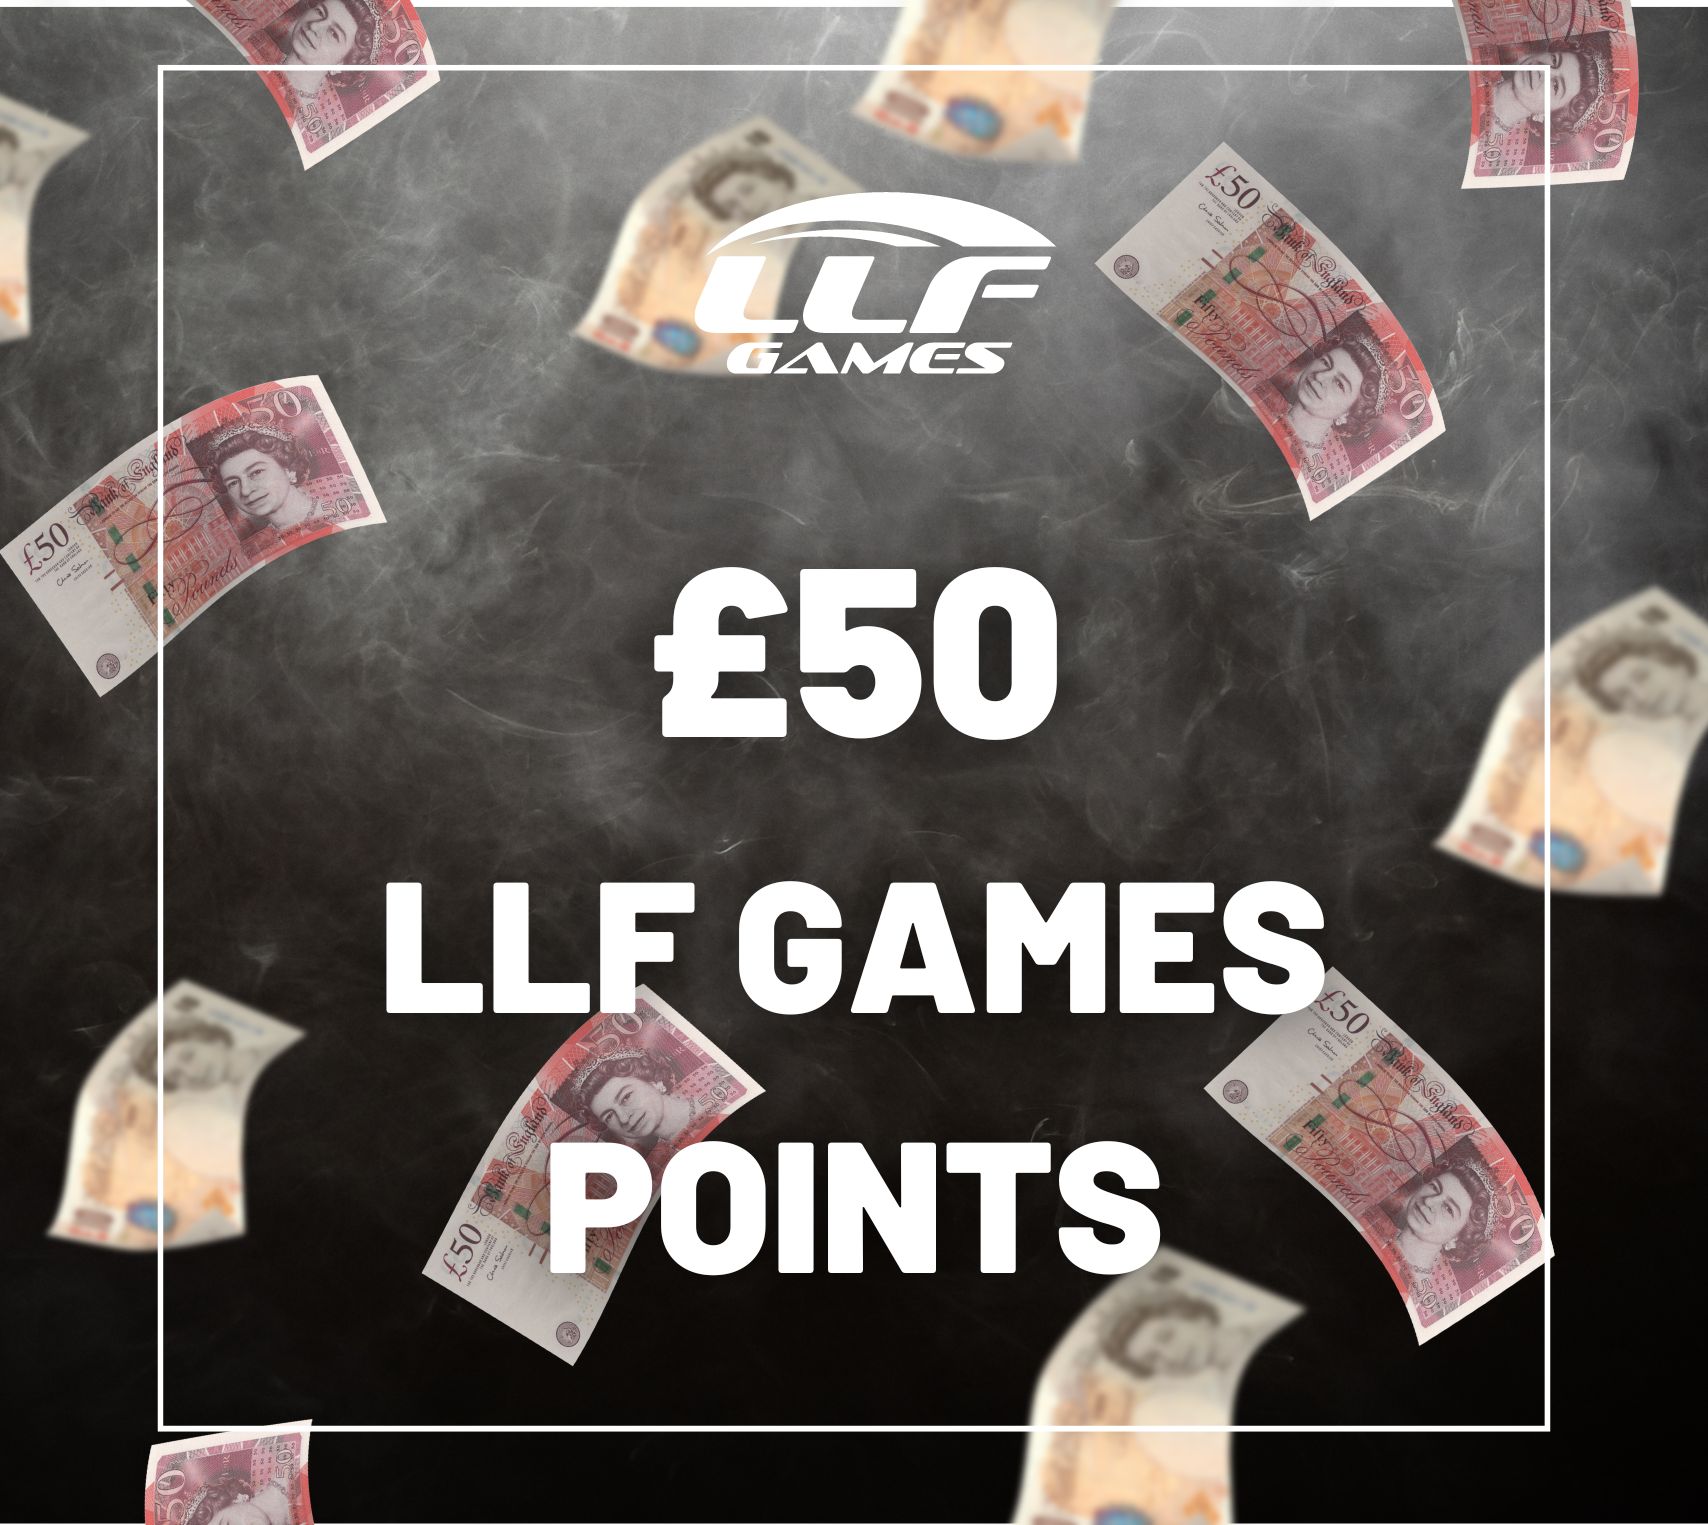 £50 LLF Games Points (Site Credit)